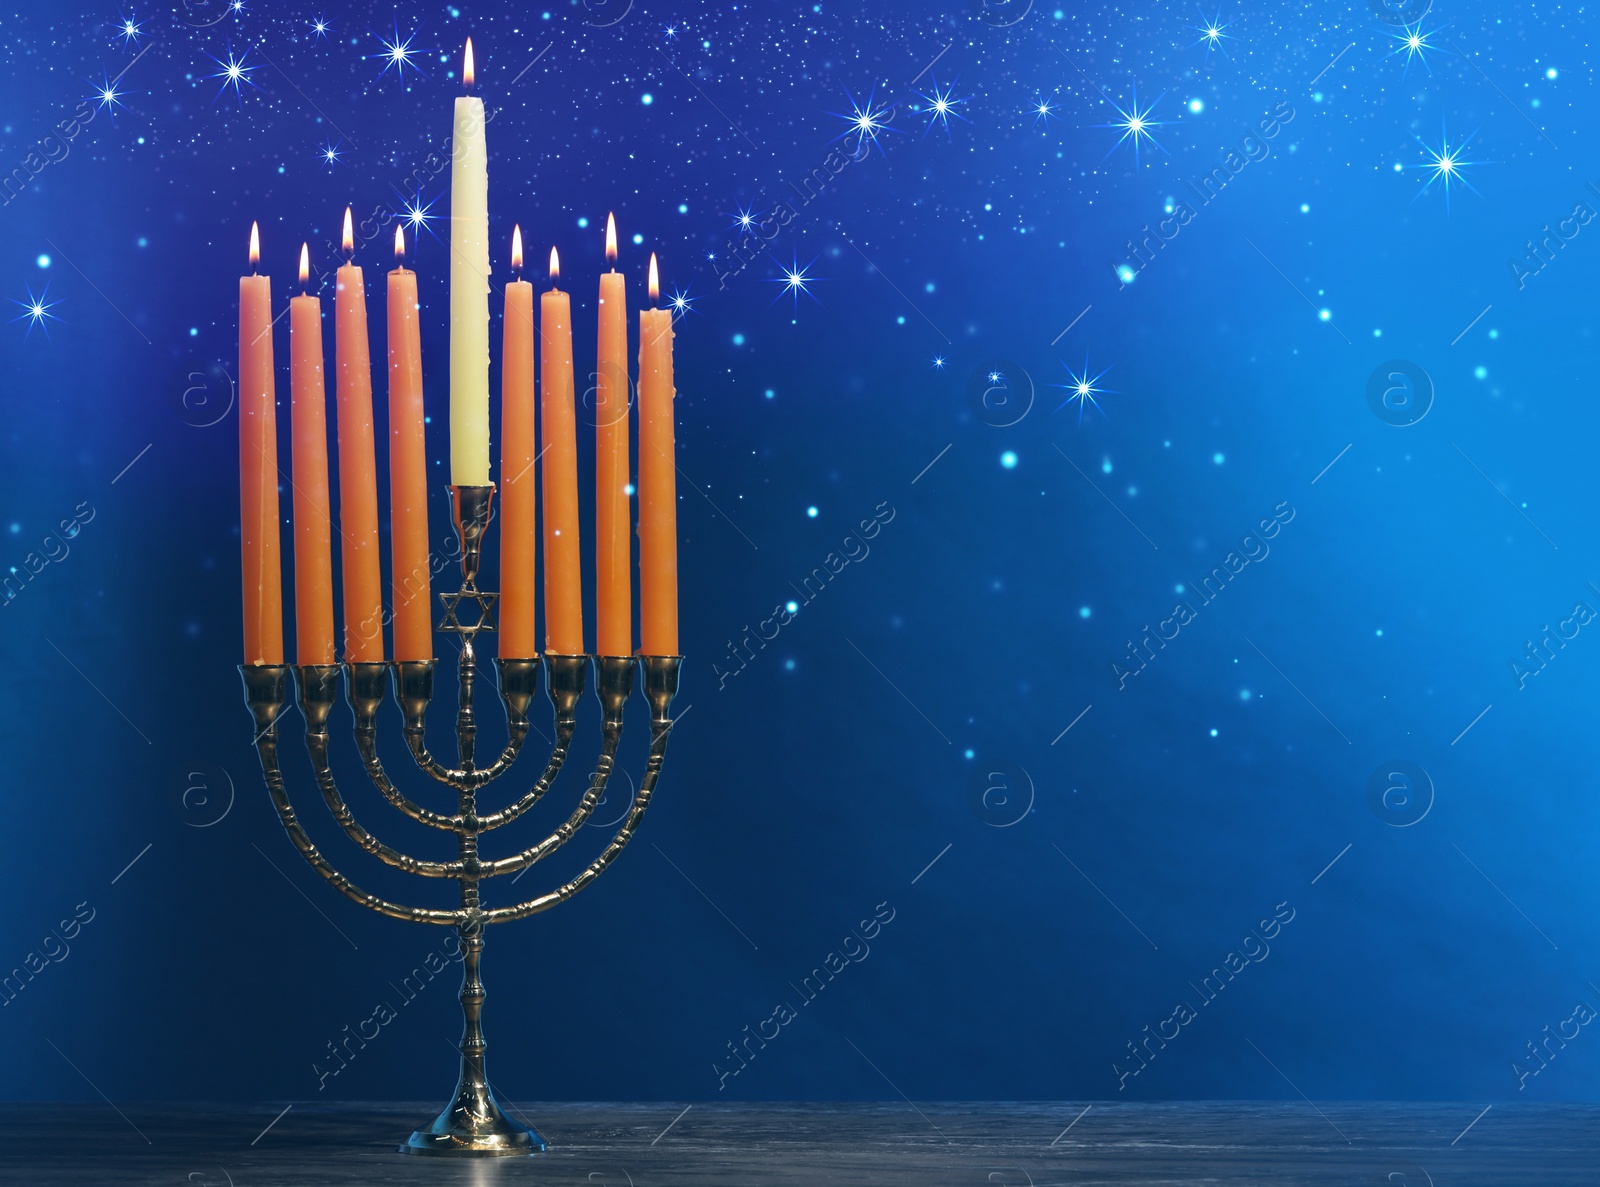 Image of Hanukkah celebration. Menorah with burning candles on wooden table against blue background, space for text